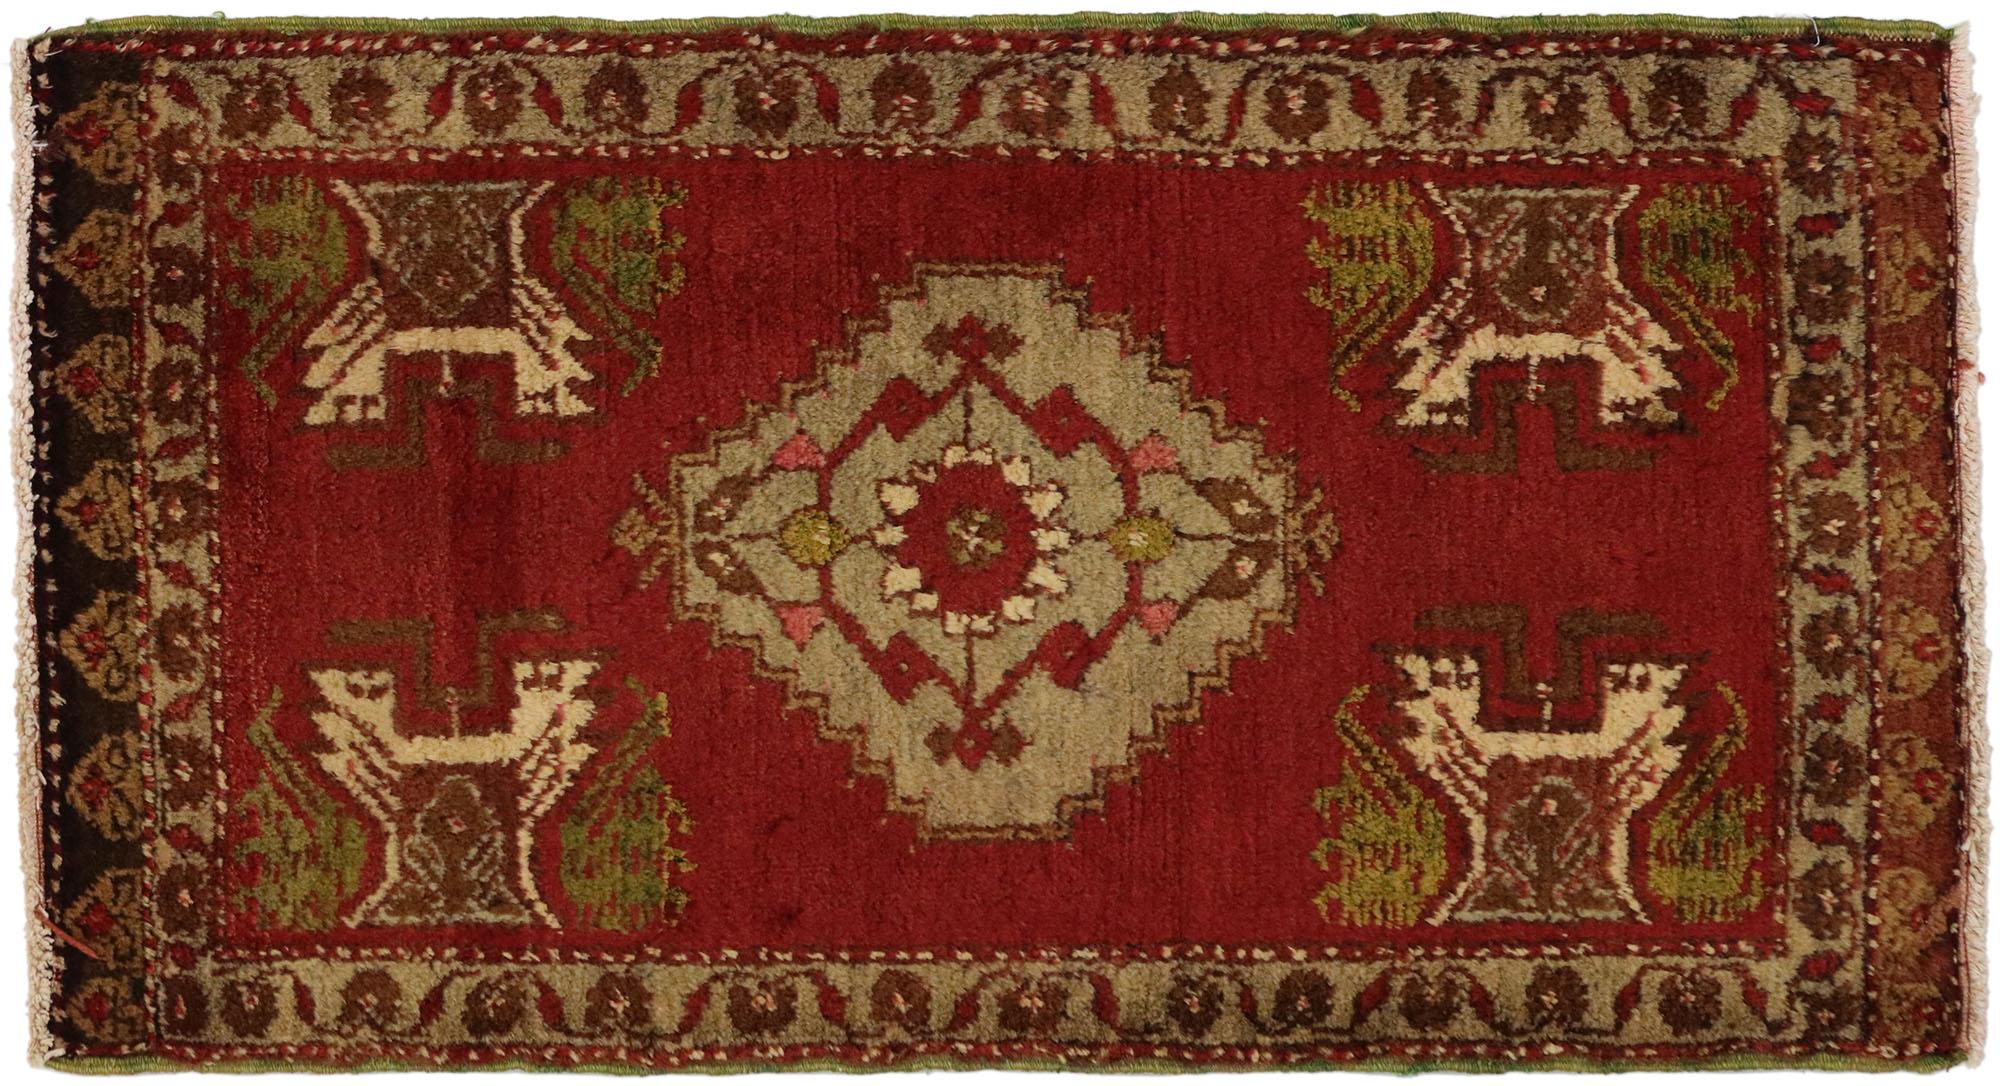 50787 Vintage Turkish Oushak Yastik Scatter Rug, Small Accent Rug 01'09 x 03'02. This hand-knotted wool vintage Turkish Oushak Yastik scatter rug features a central stepped medallion patterned with a geometric botanical scene flanked with four